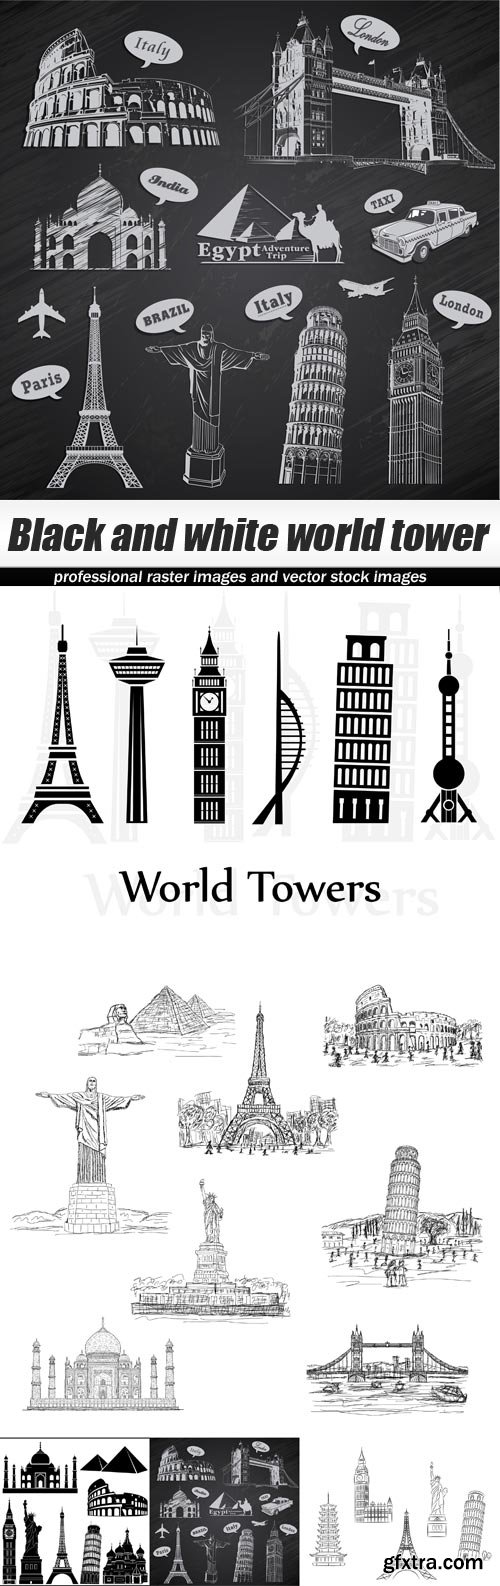 Black and white world tower